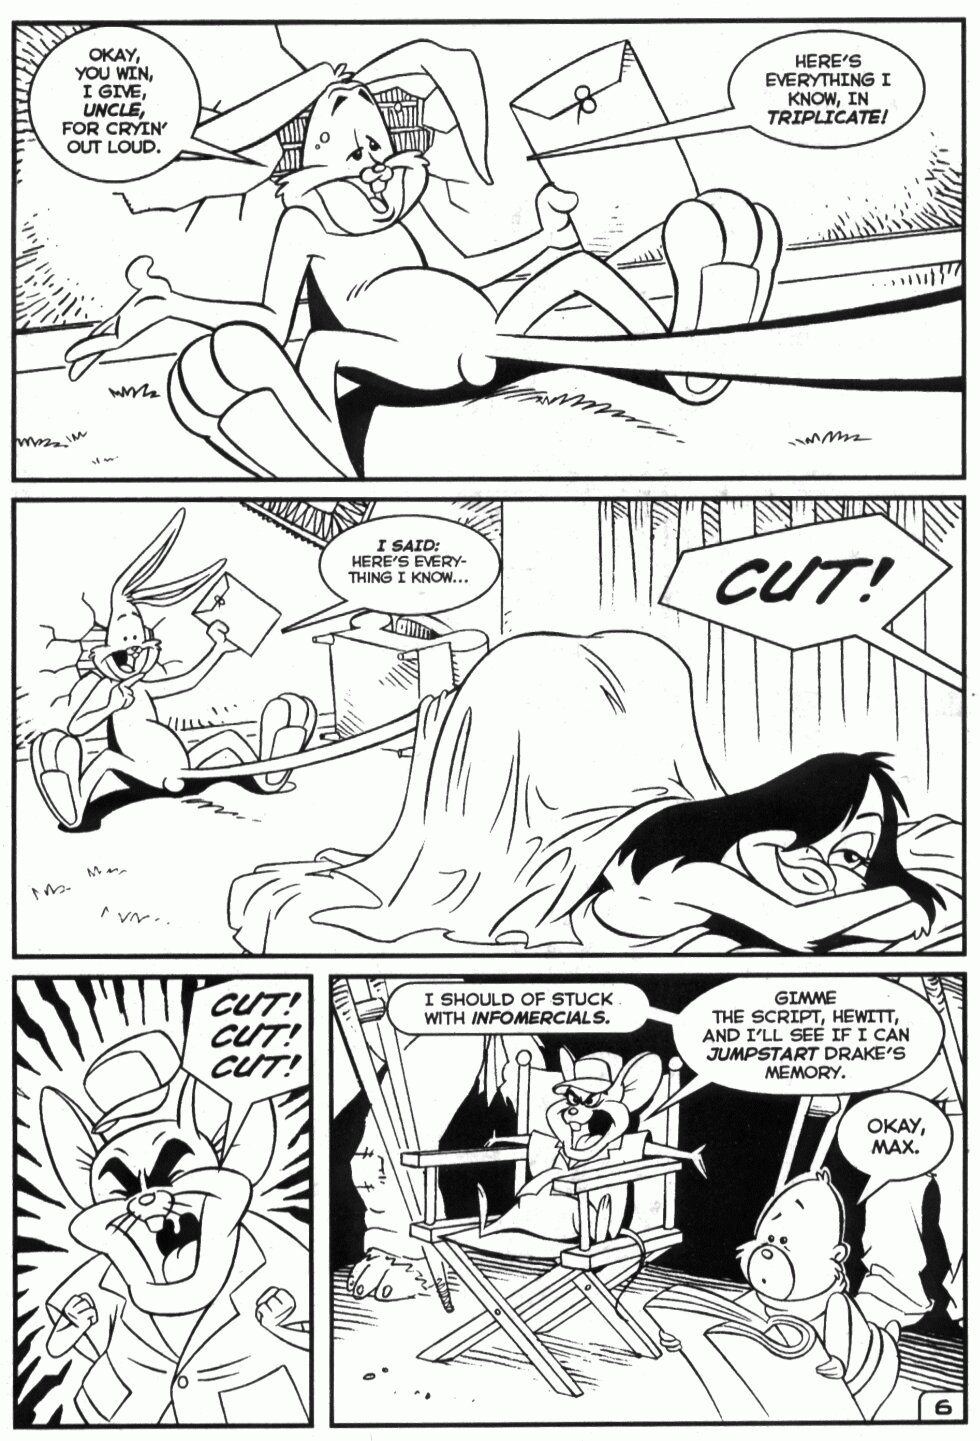 [Cindy Crowell, Stan Jinx] Filthy Animals - Part #1: Of Toons and Poons... 6